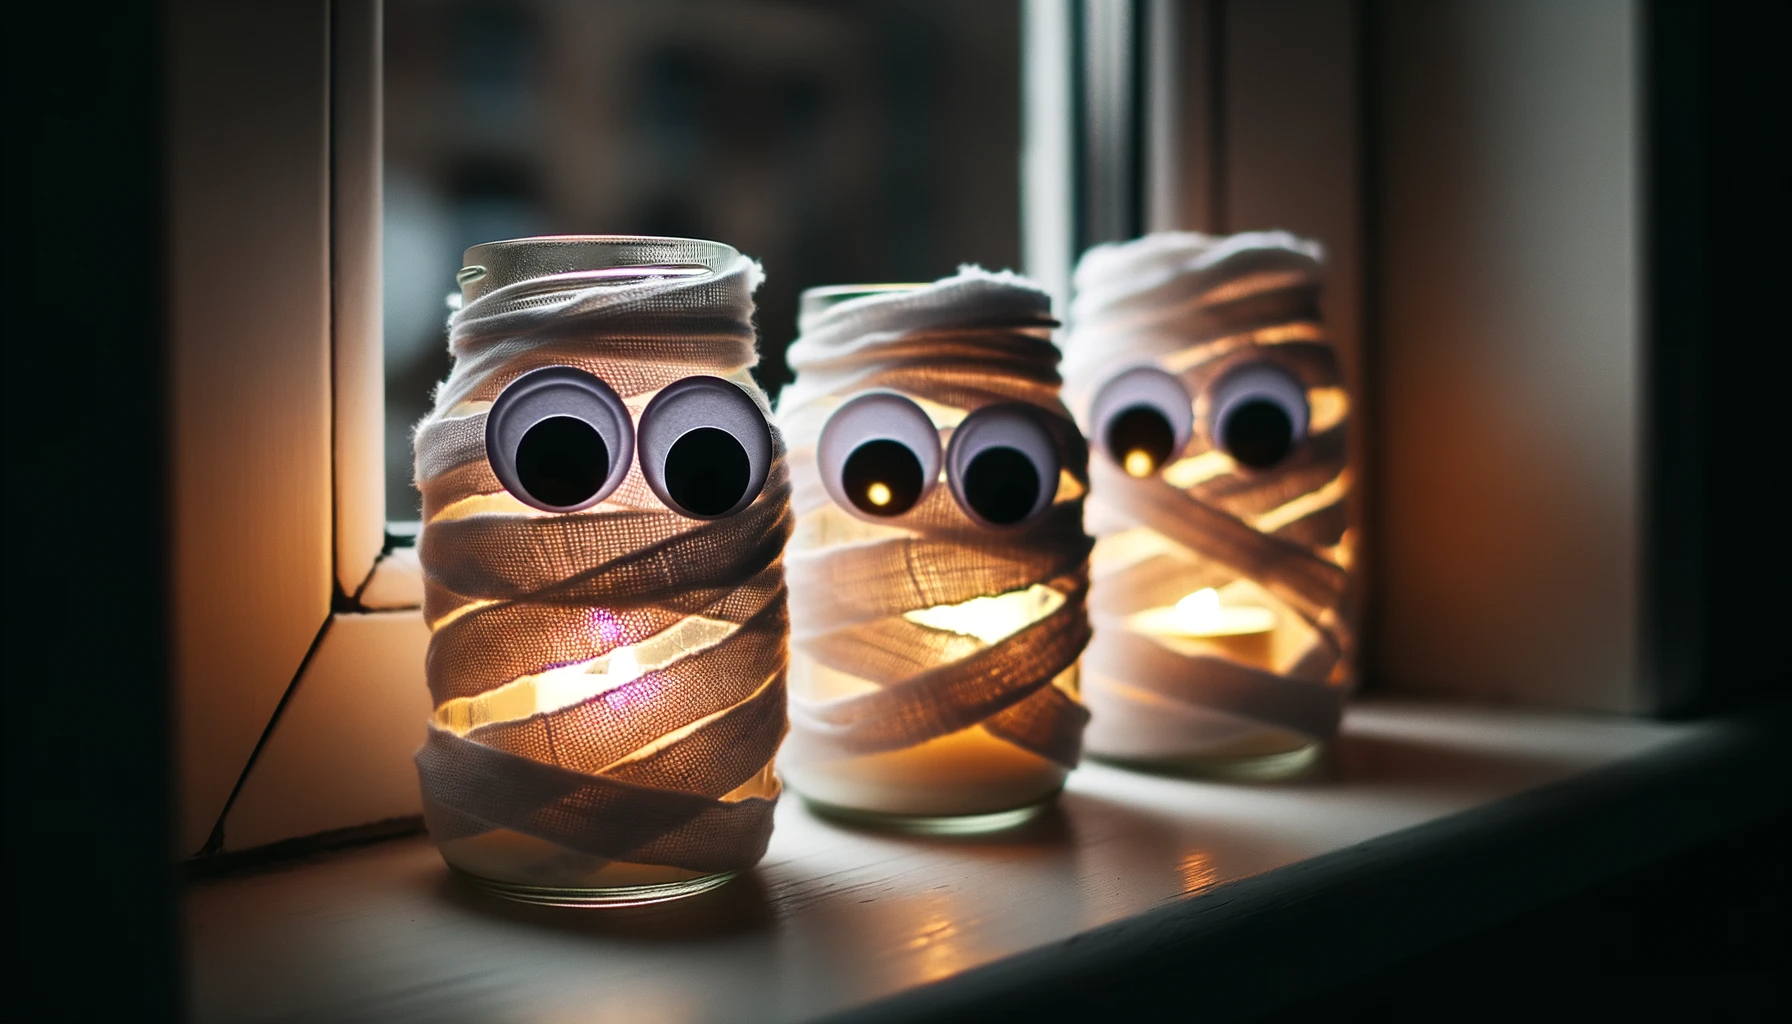 mason jar mummies with googly eyes and candles inside